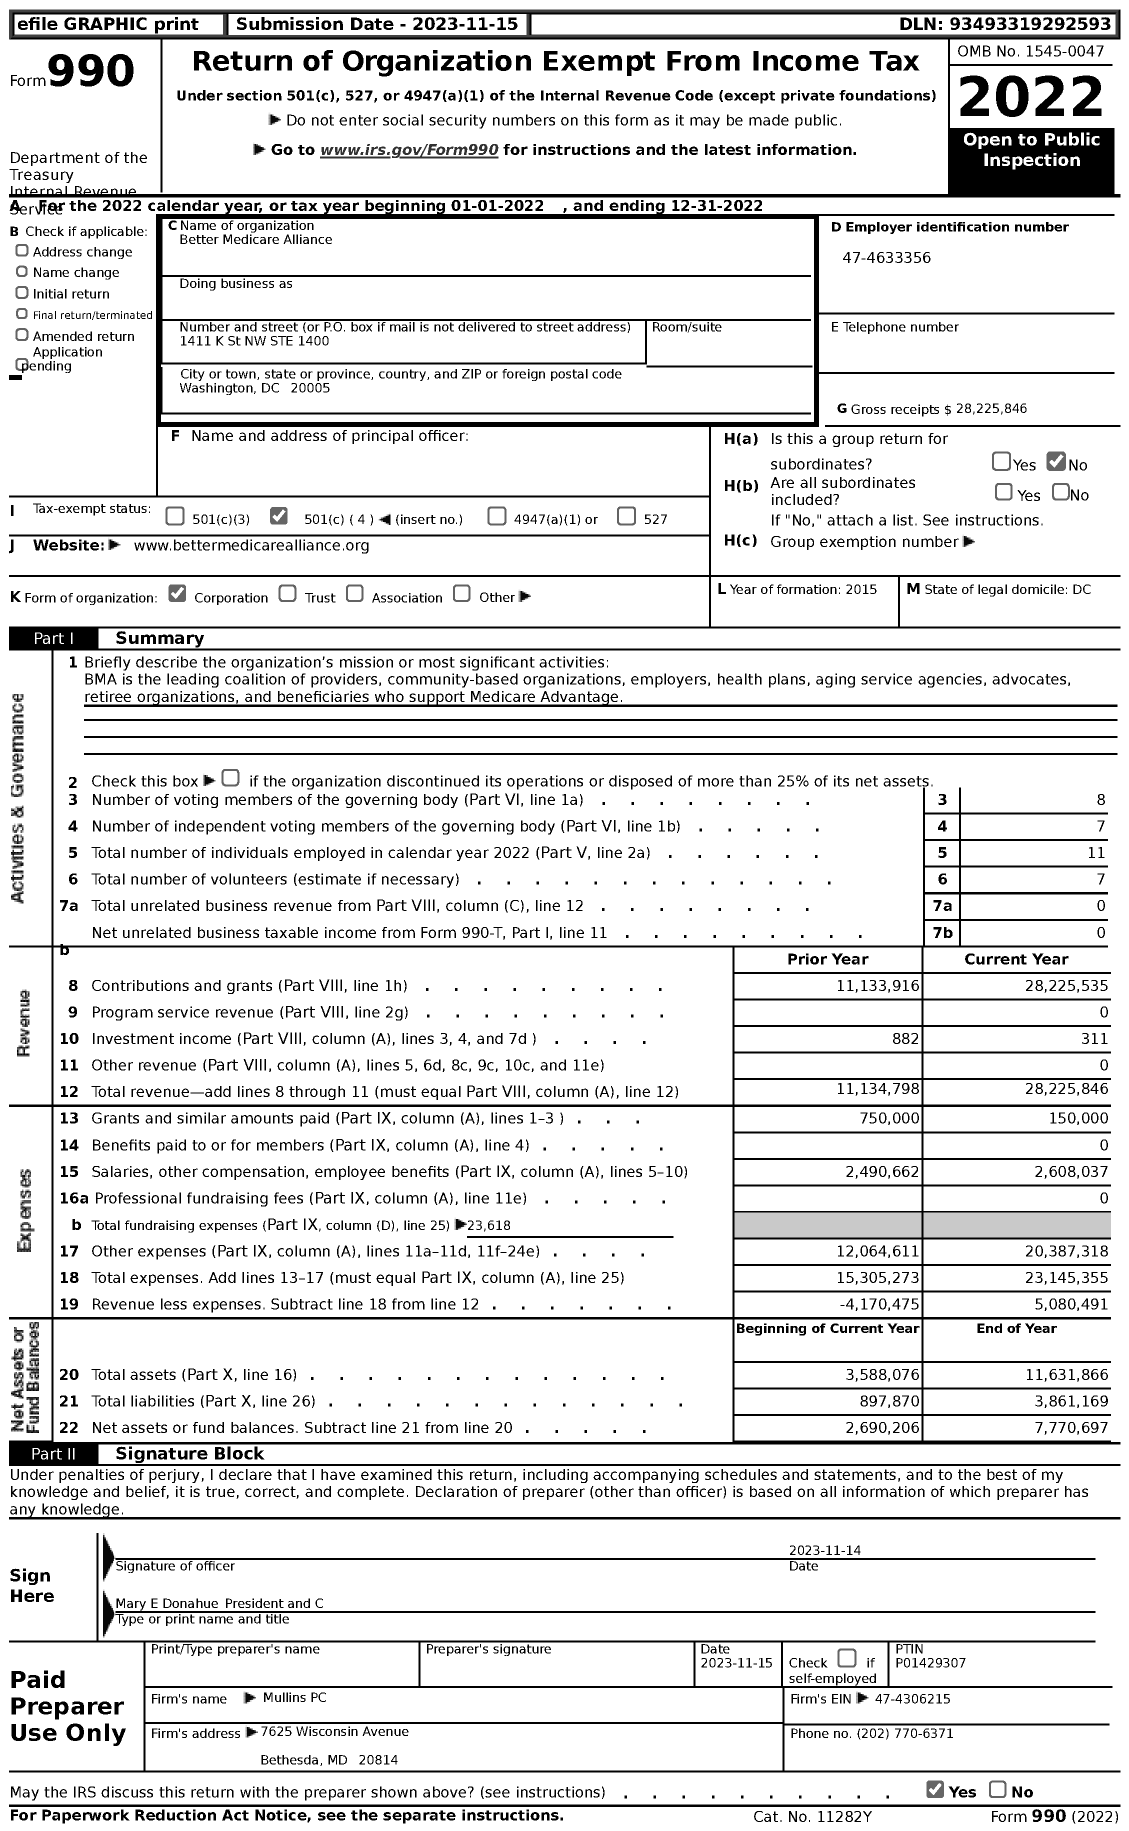 Image of first page of 2022 Form 990 for Better Medicare Alliance (BMA)